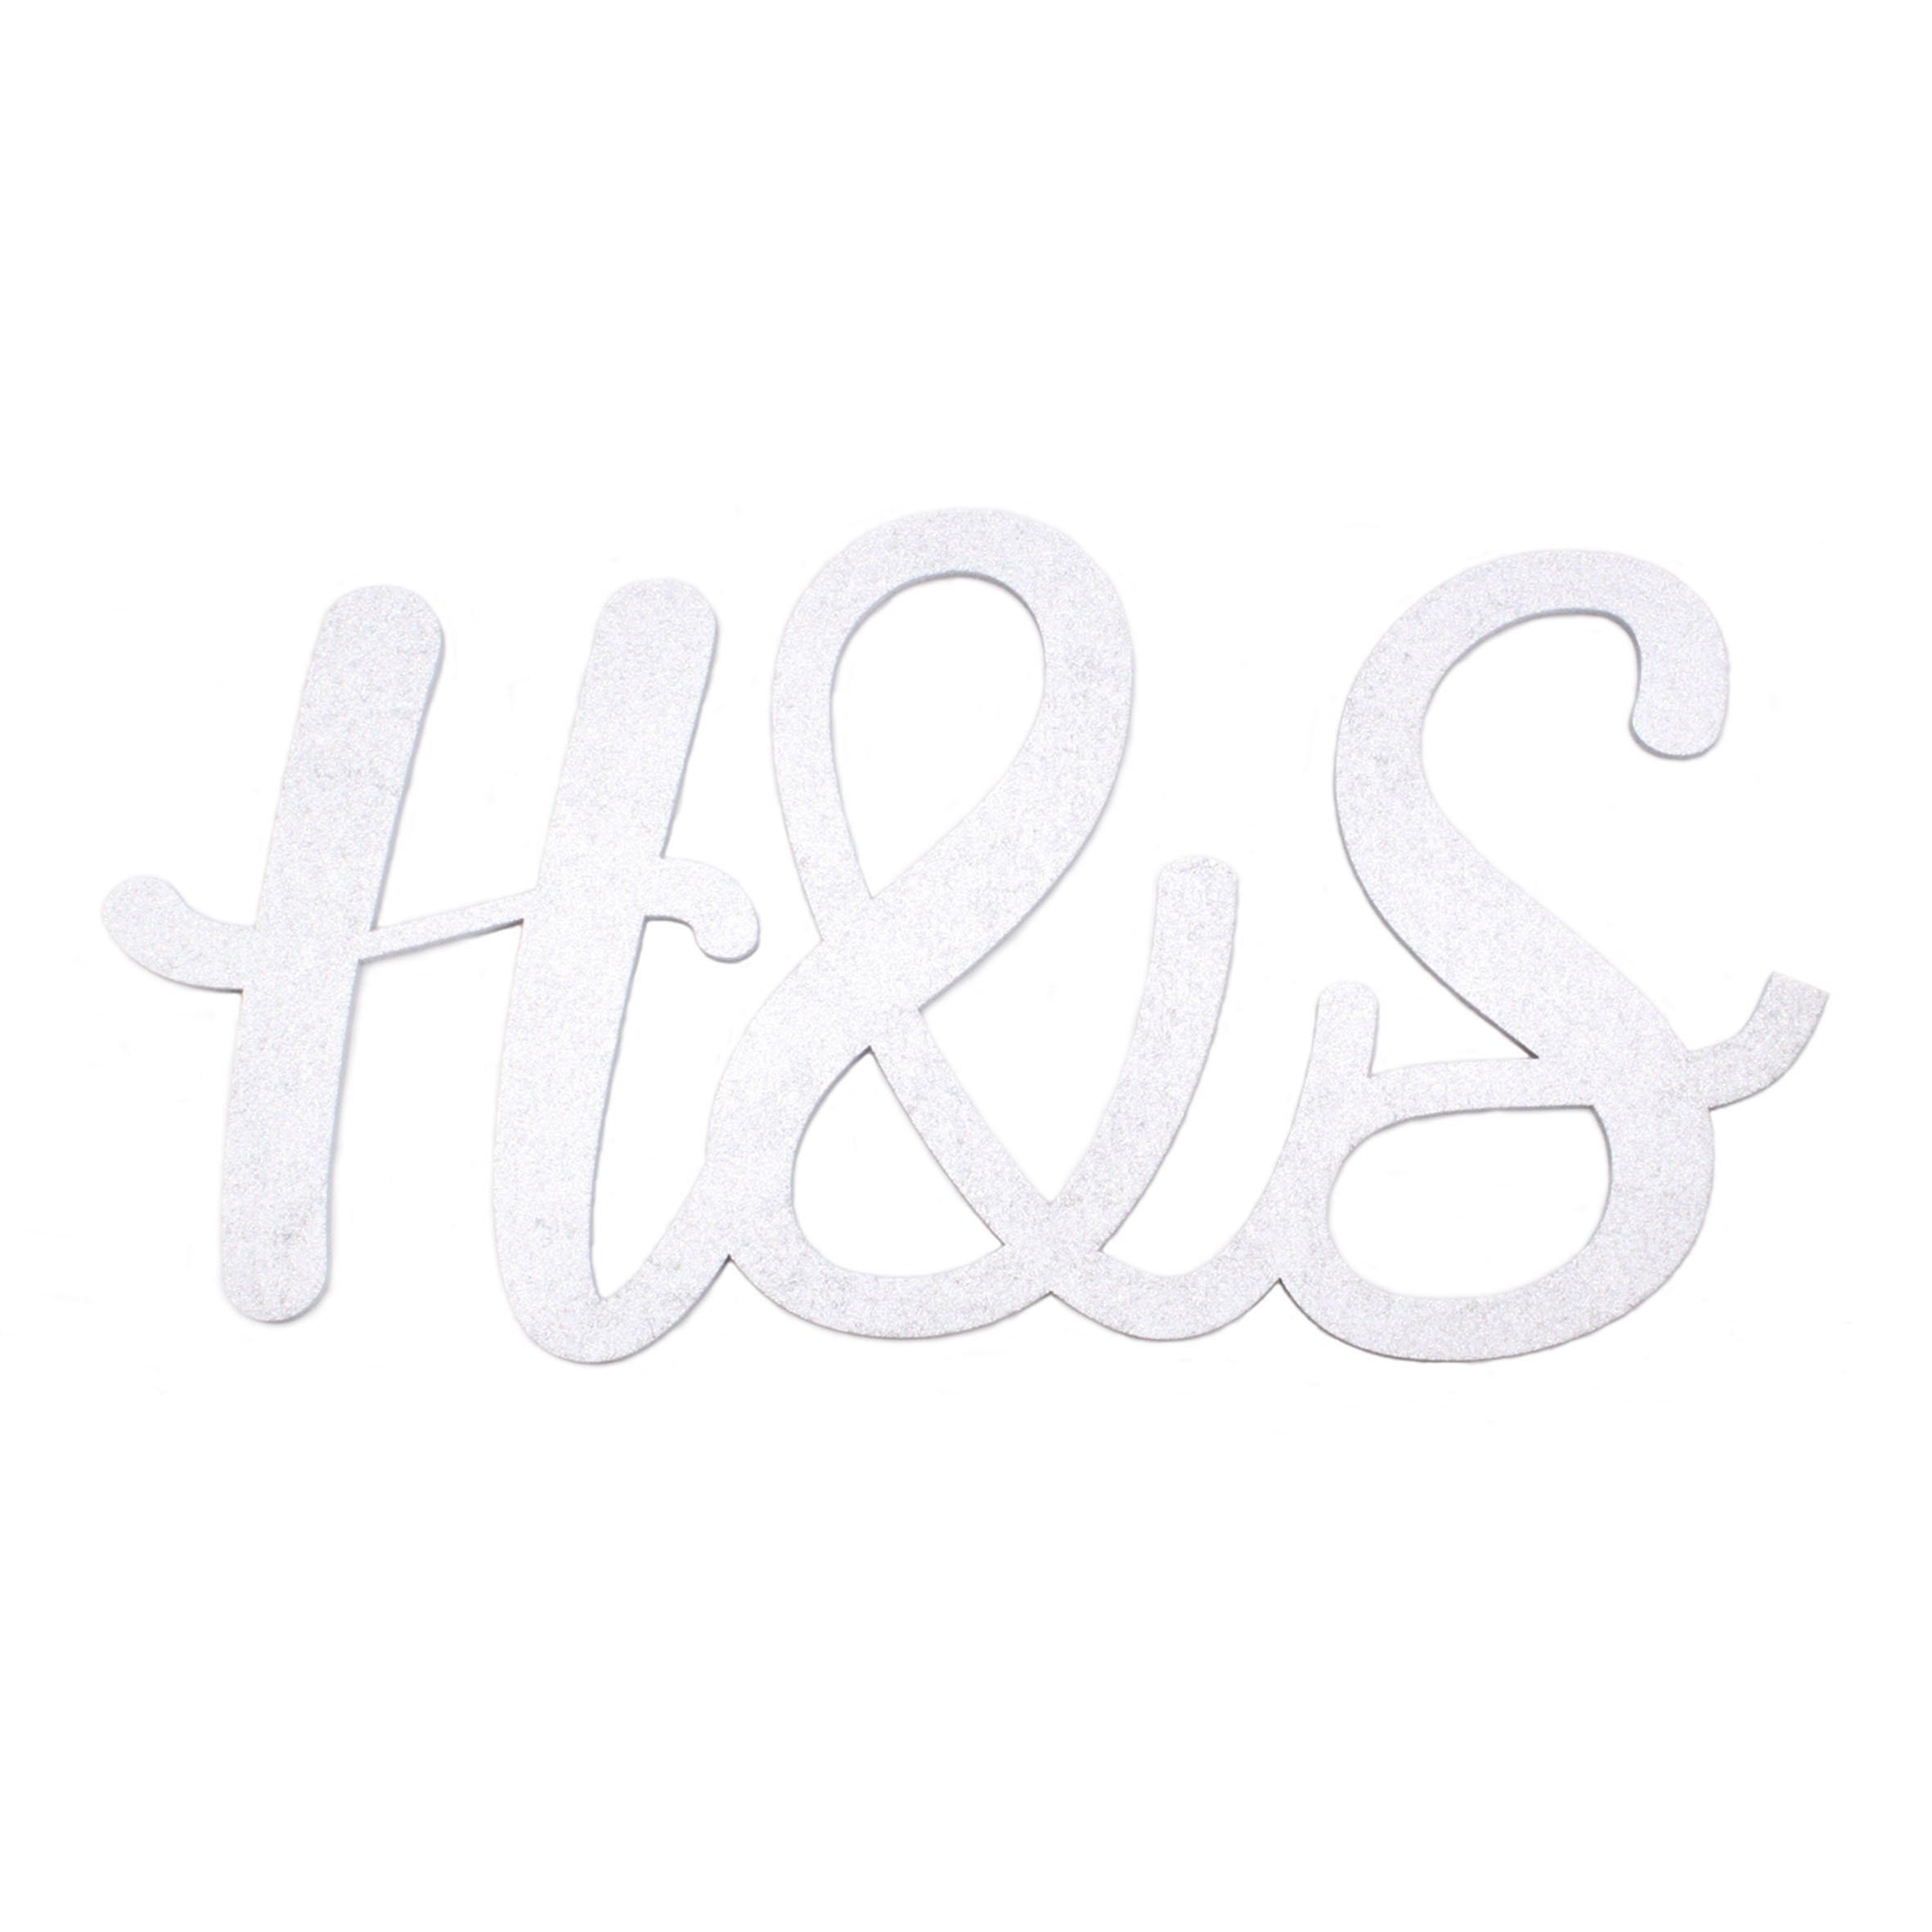 Personalised Adjoined Initials Silver Laser Cut From 3mm Mdf Wood | Your Initials Anniversary Gift Custom